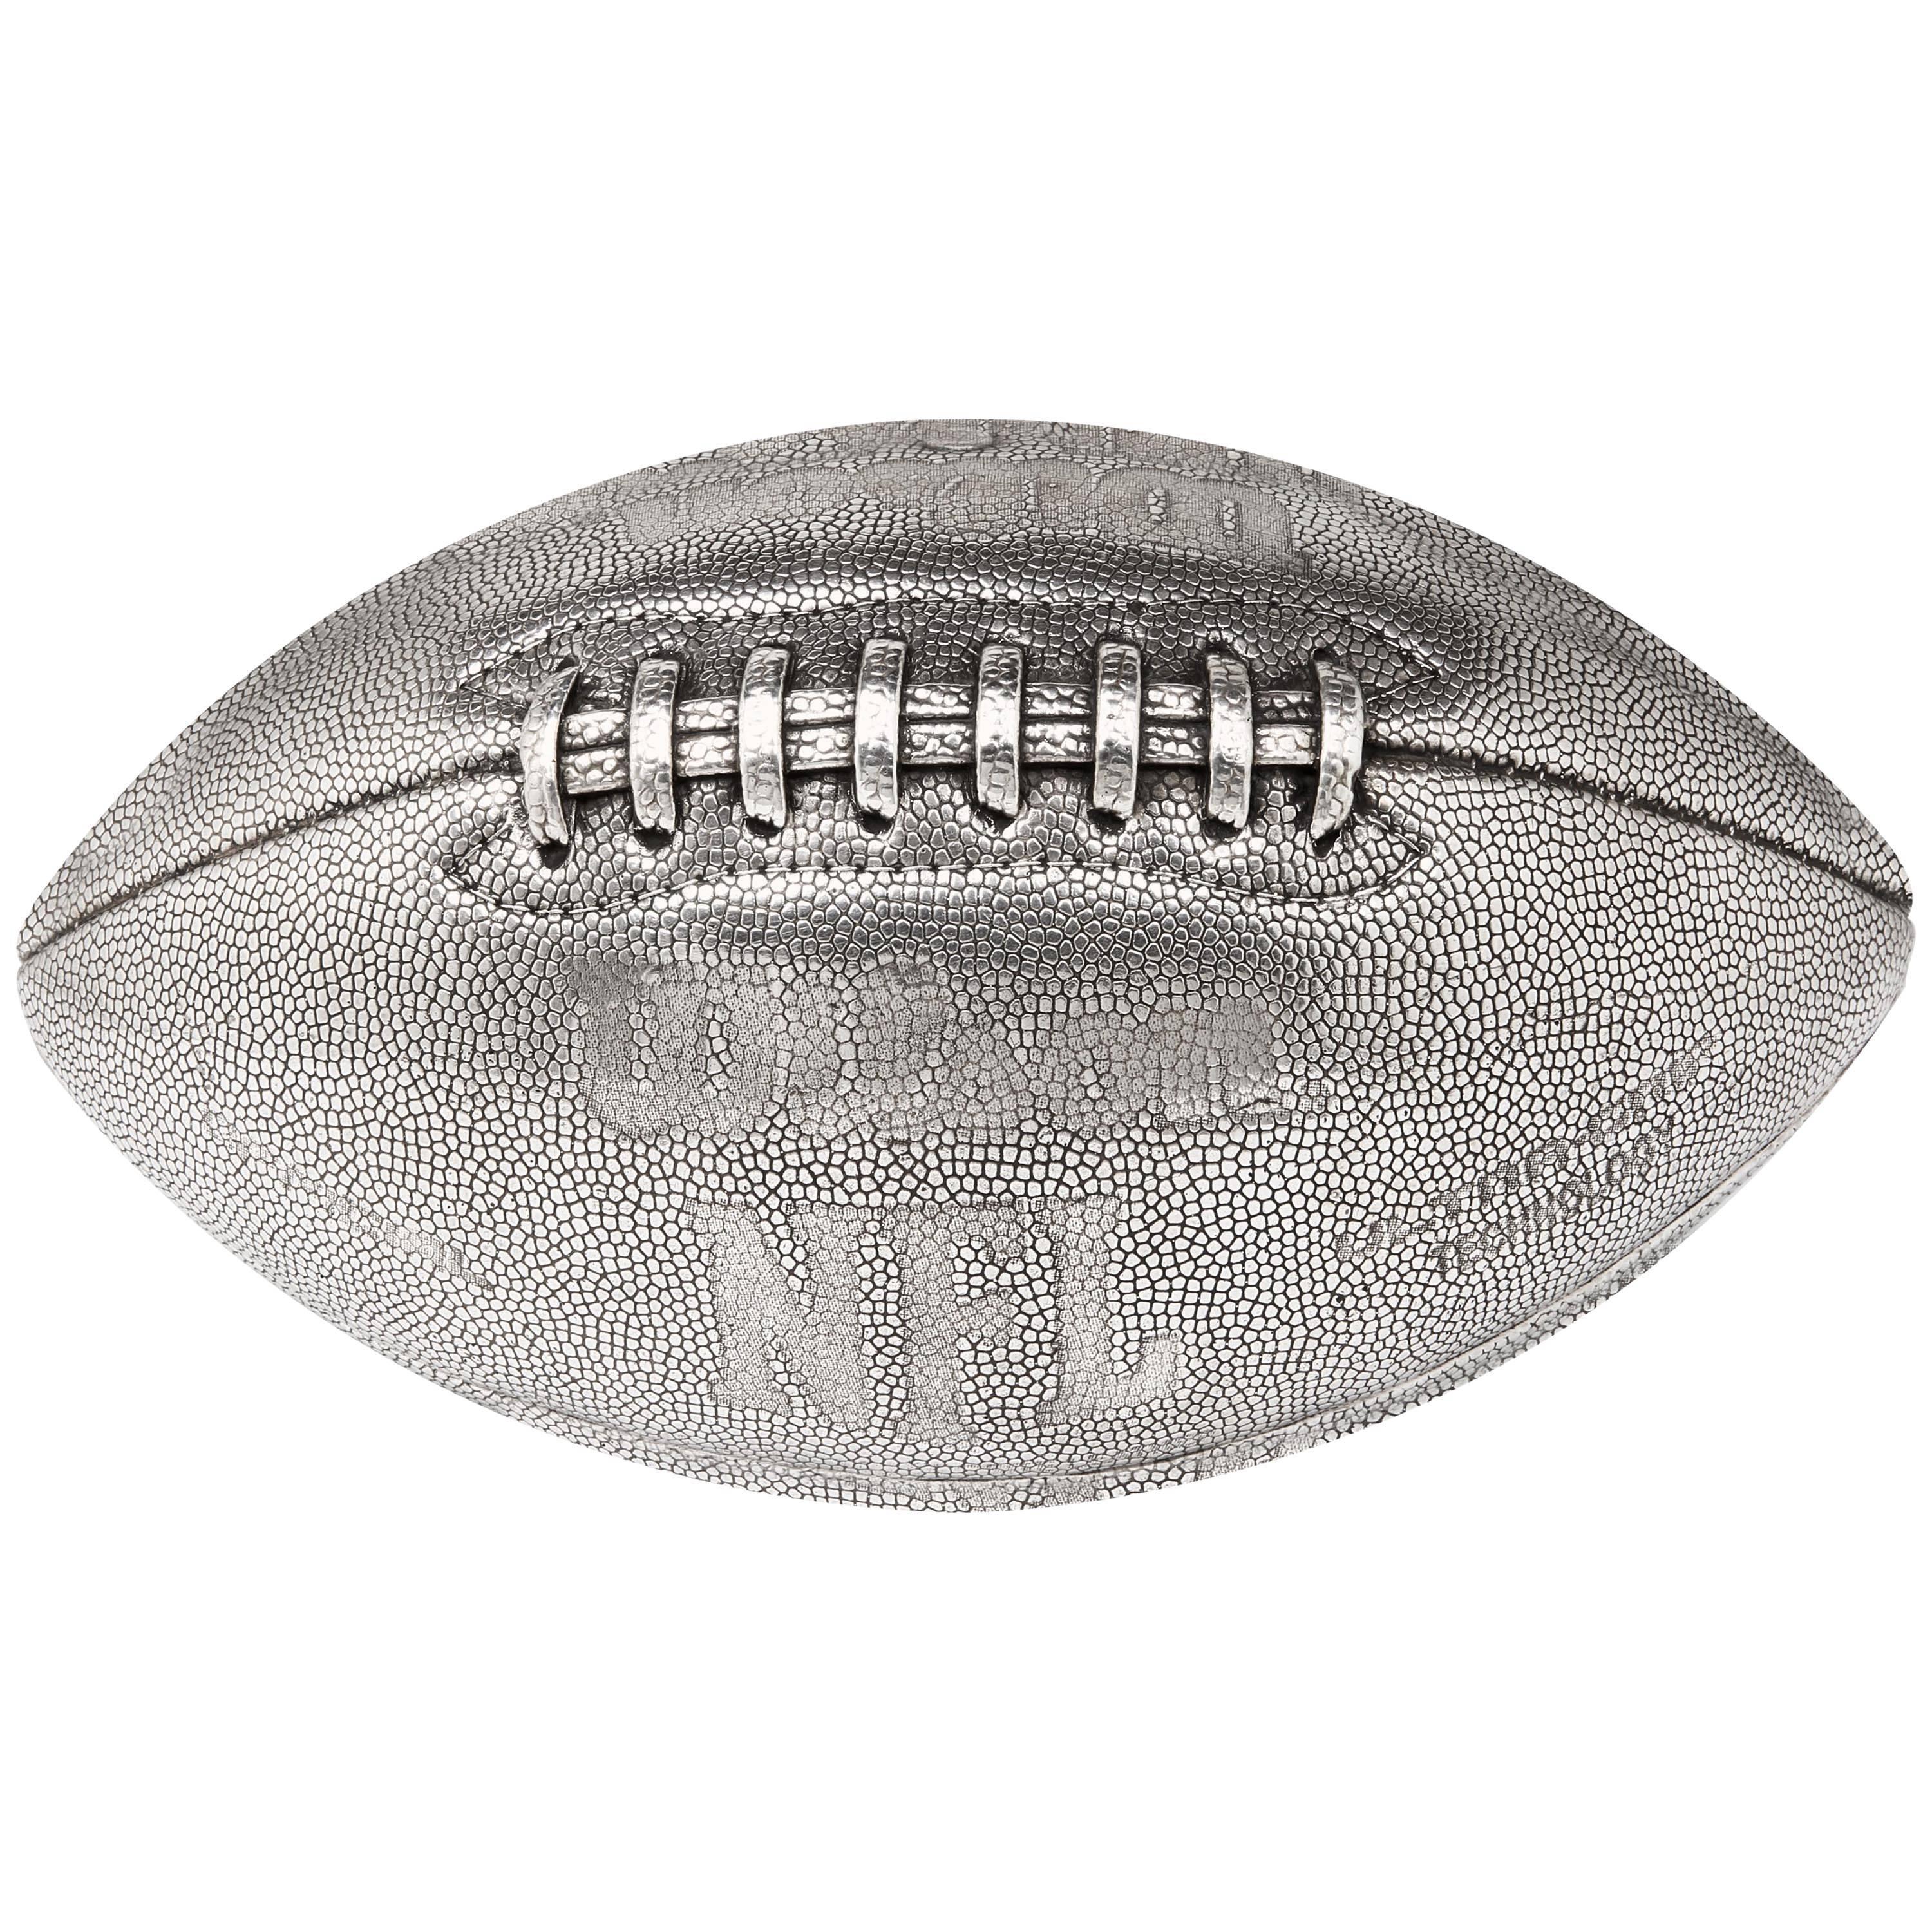 Touchdown! Wilson NFL Solid Silver Football